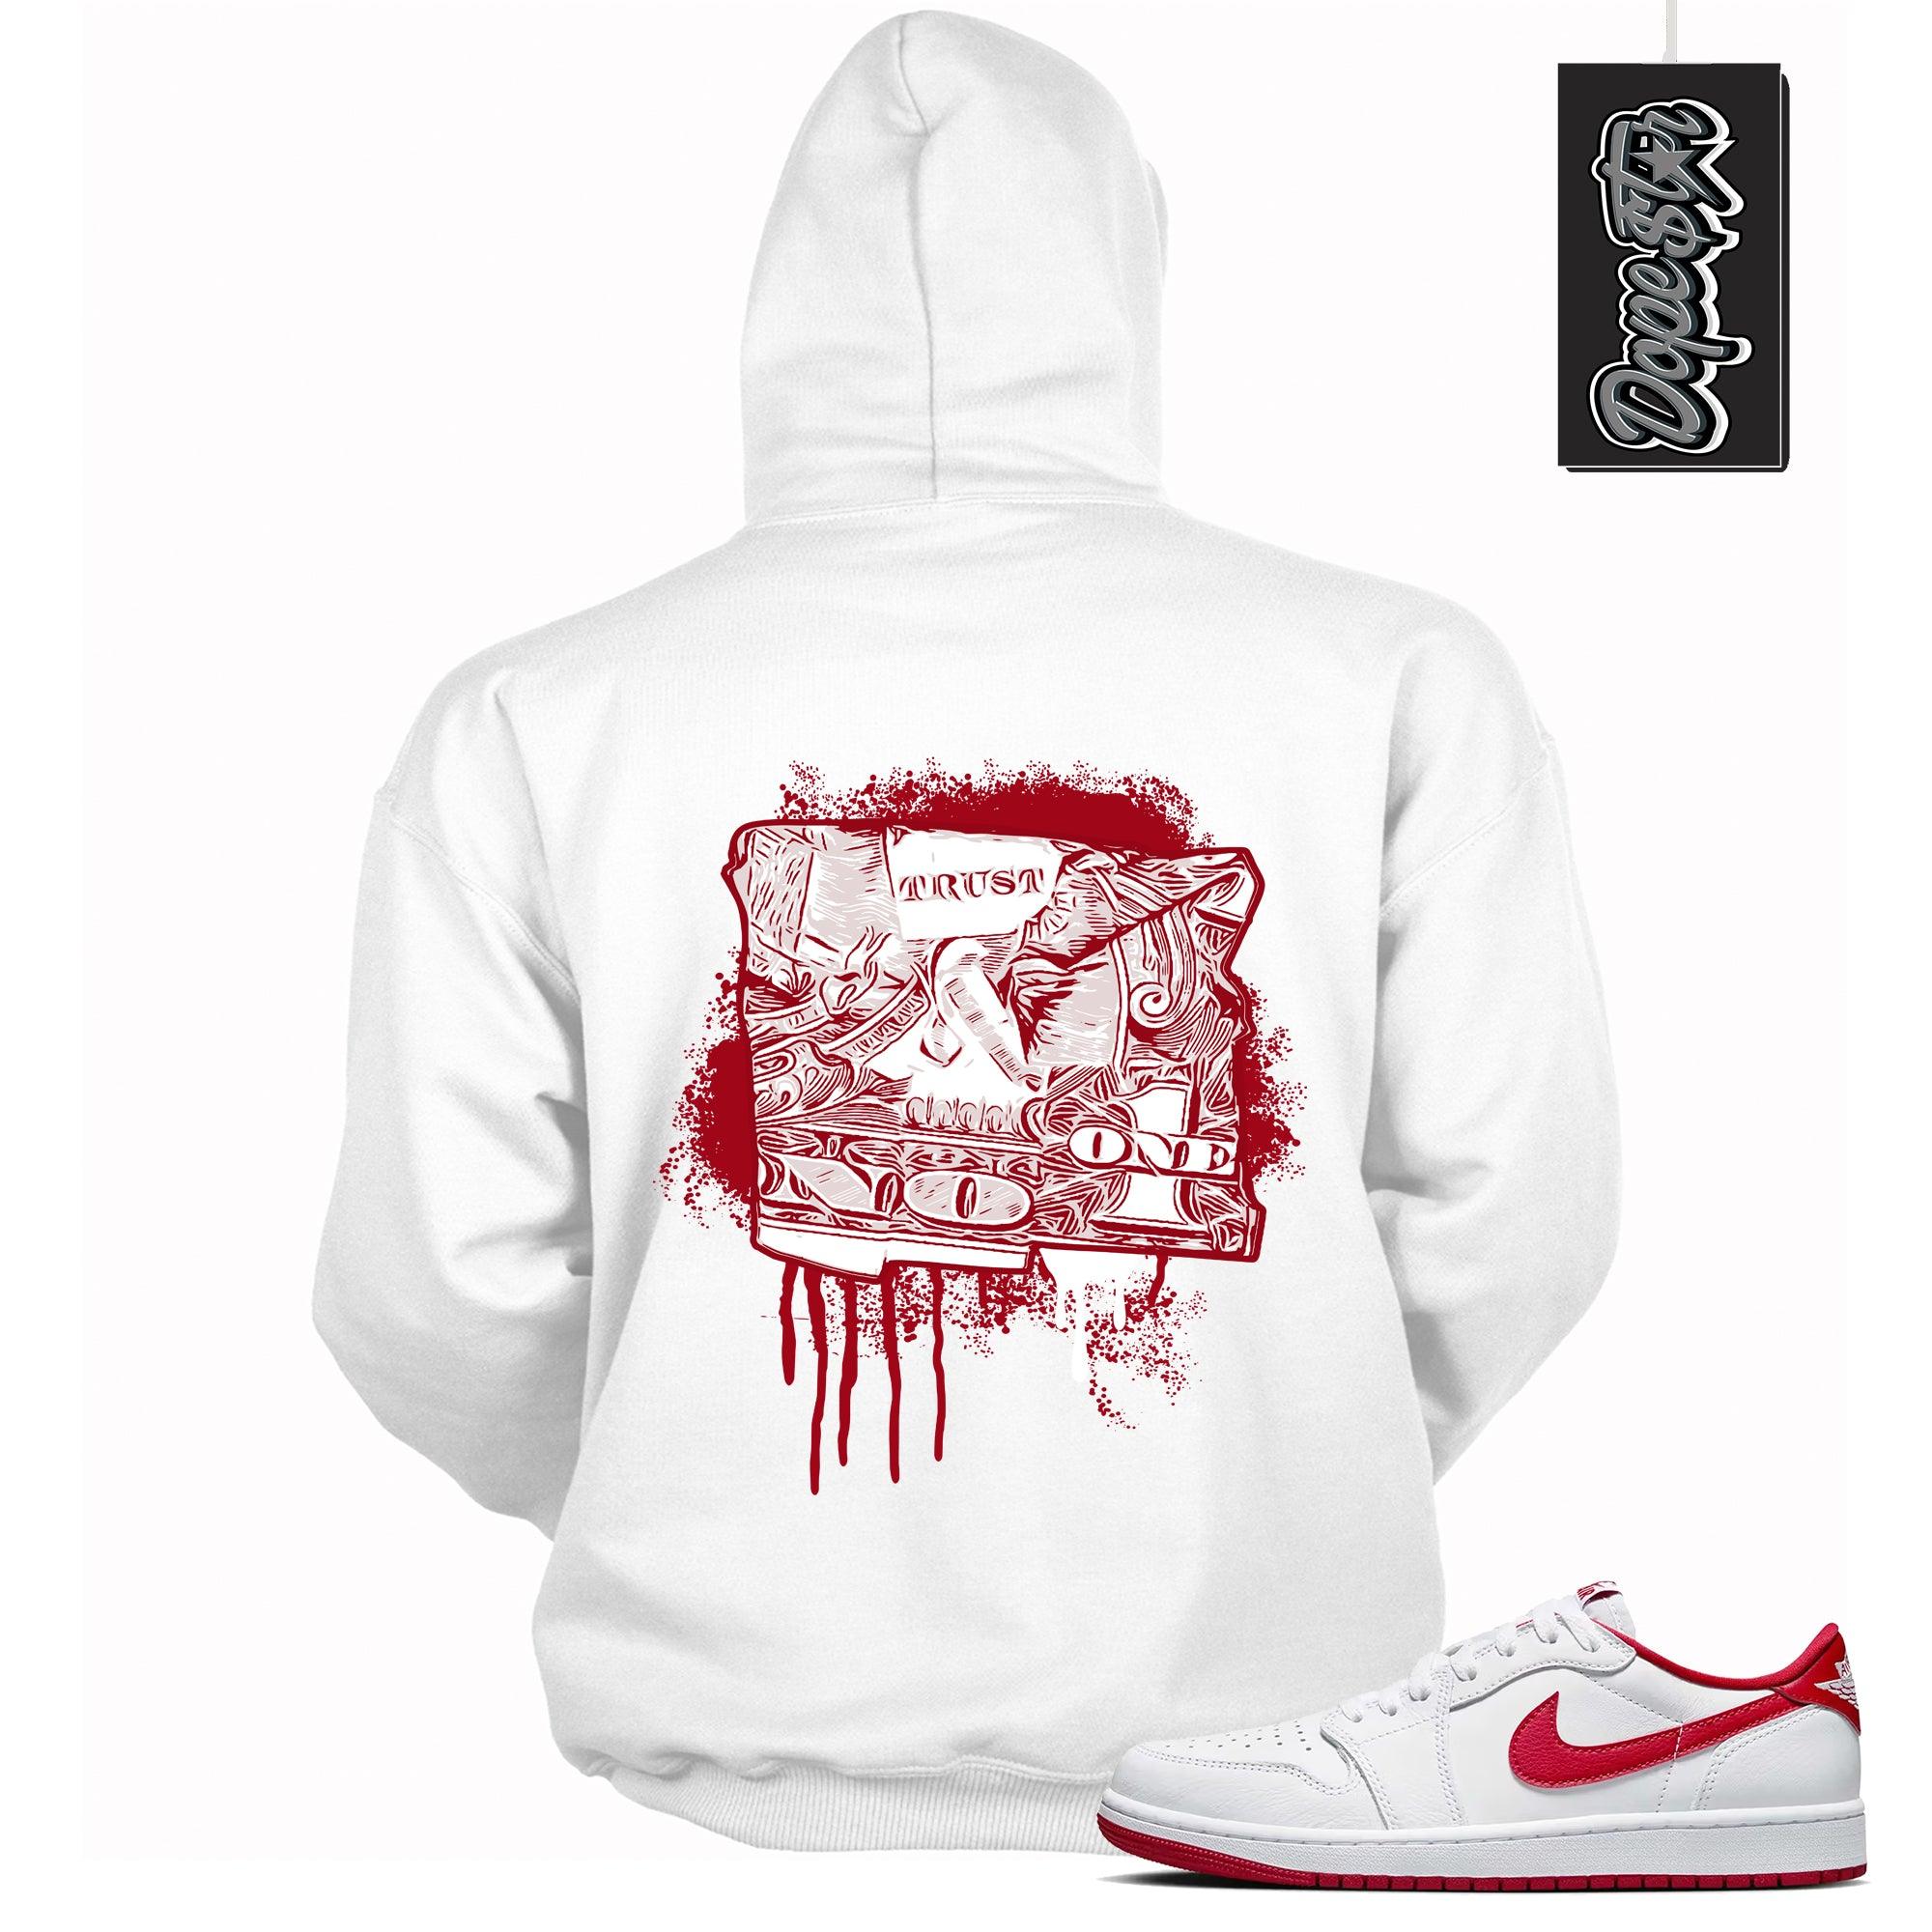 Cool White Graphic Hoodie with “ Trust No One Dollar “ print, that perfectly matches Air Jordan 1 Retro Low OG University Red and white sneakers